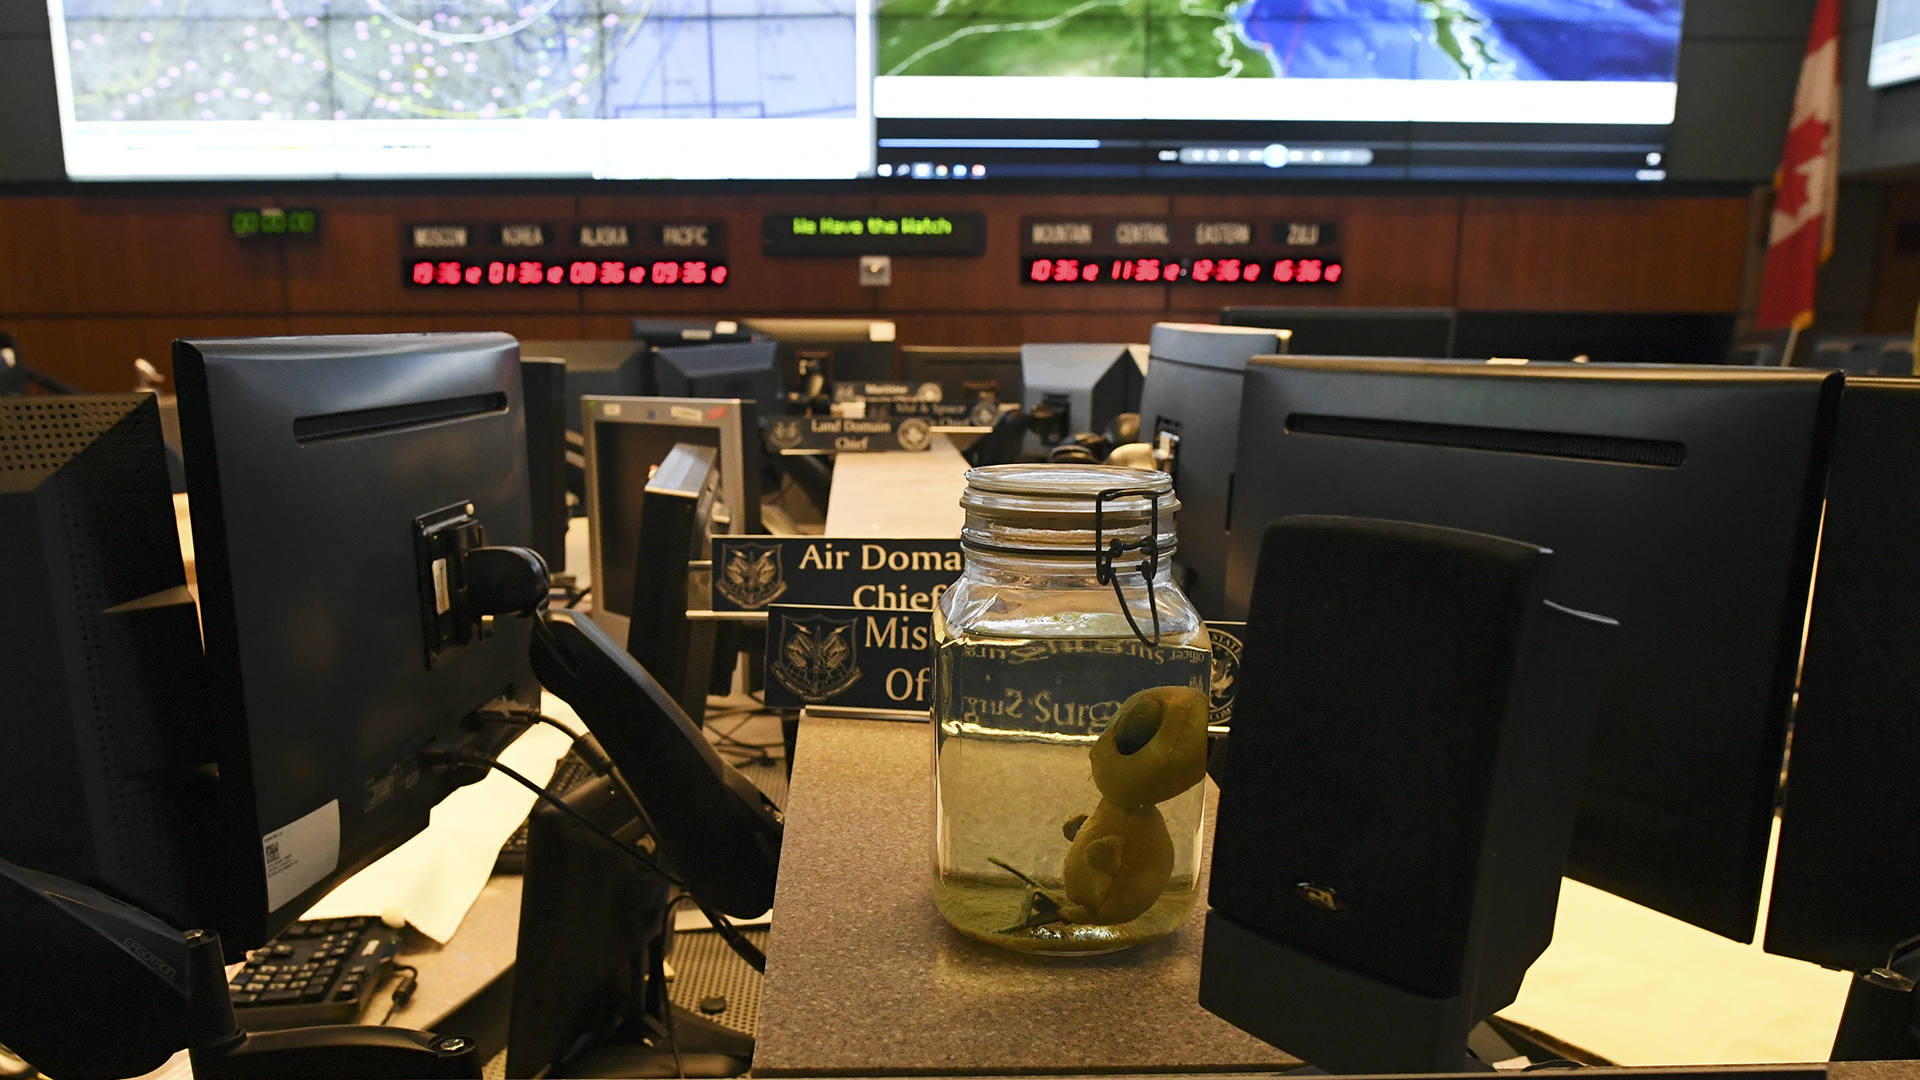 COLORADO SPRINGS, CO - MAY 10: A small group of media were allowed an inside look at the command center at Cheyenne Mountain Air Force Station on May 10, 2018 in Colorado Springs, Colorado. As a part of an on going joke the command center has stuffed alien doll in a jar placed in front of the director's desk. NORAD celebrates its 60th Anniversary at Cheyenne Mountain Air Force Station. (Photo by RJ Sangosti/The Denver Post via Getty Images)